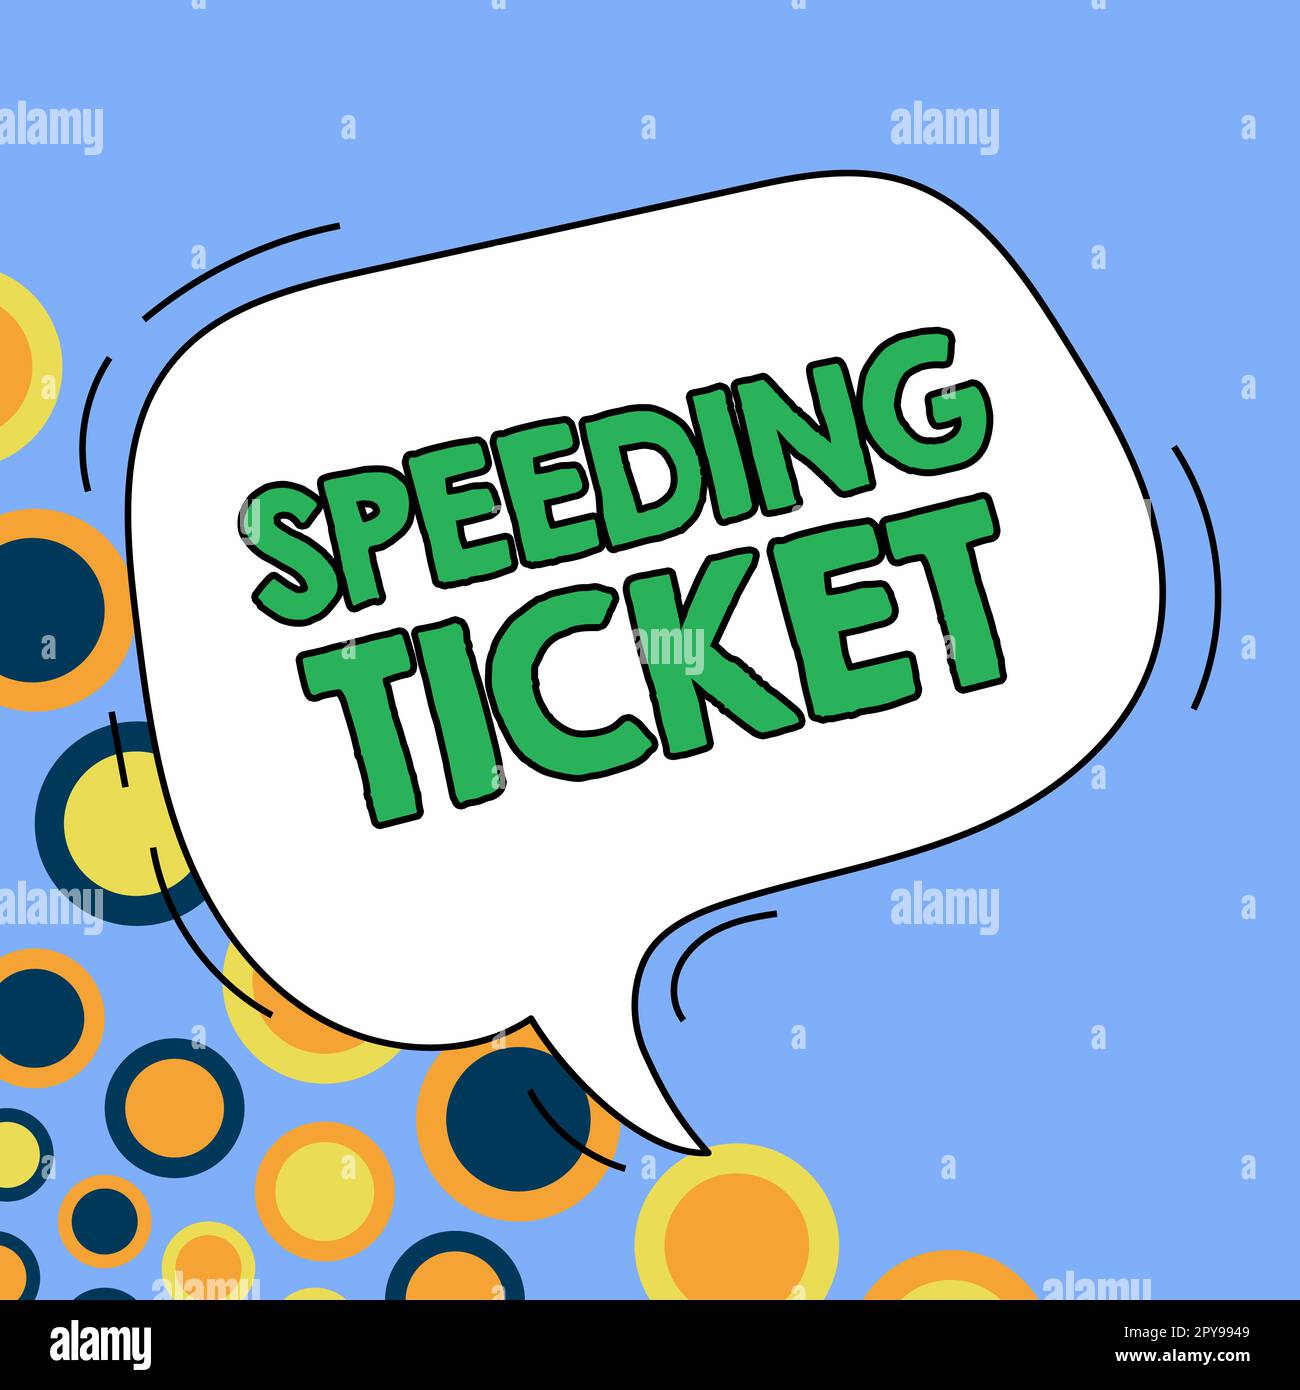 Text sign showing Speeding Ticket. Concept meaning psychological test for the maximum speed of performing a task Stock Photo